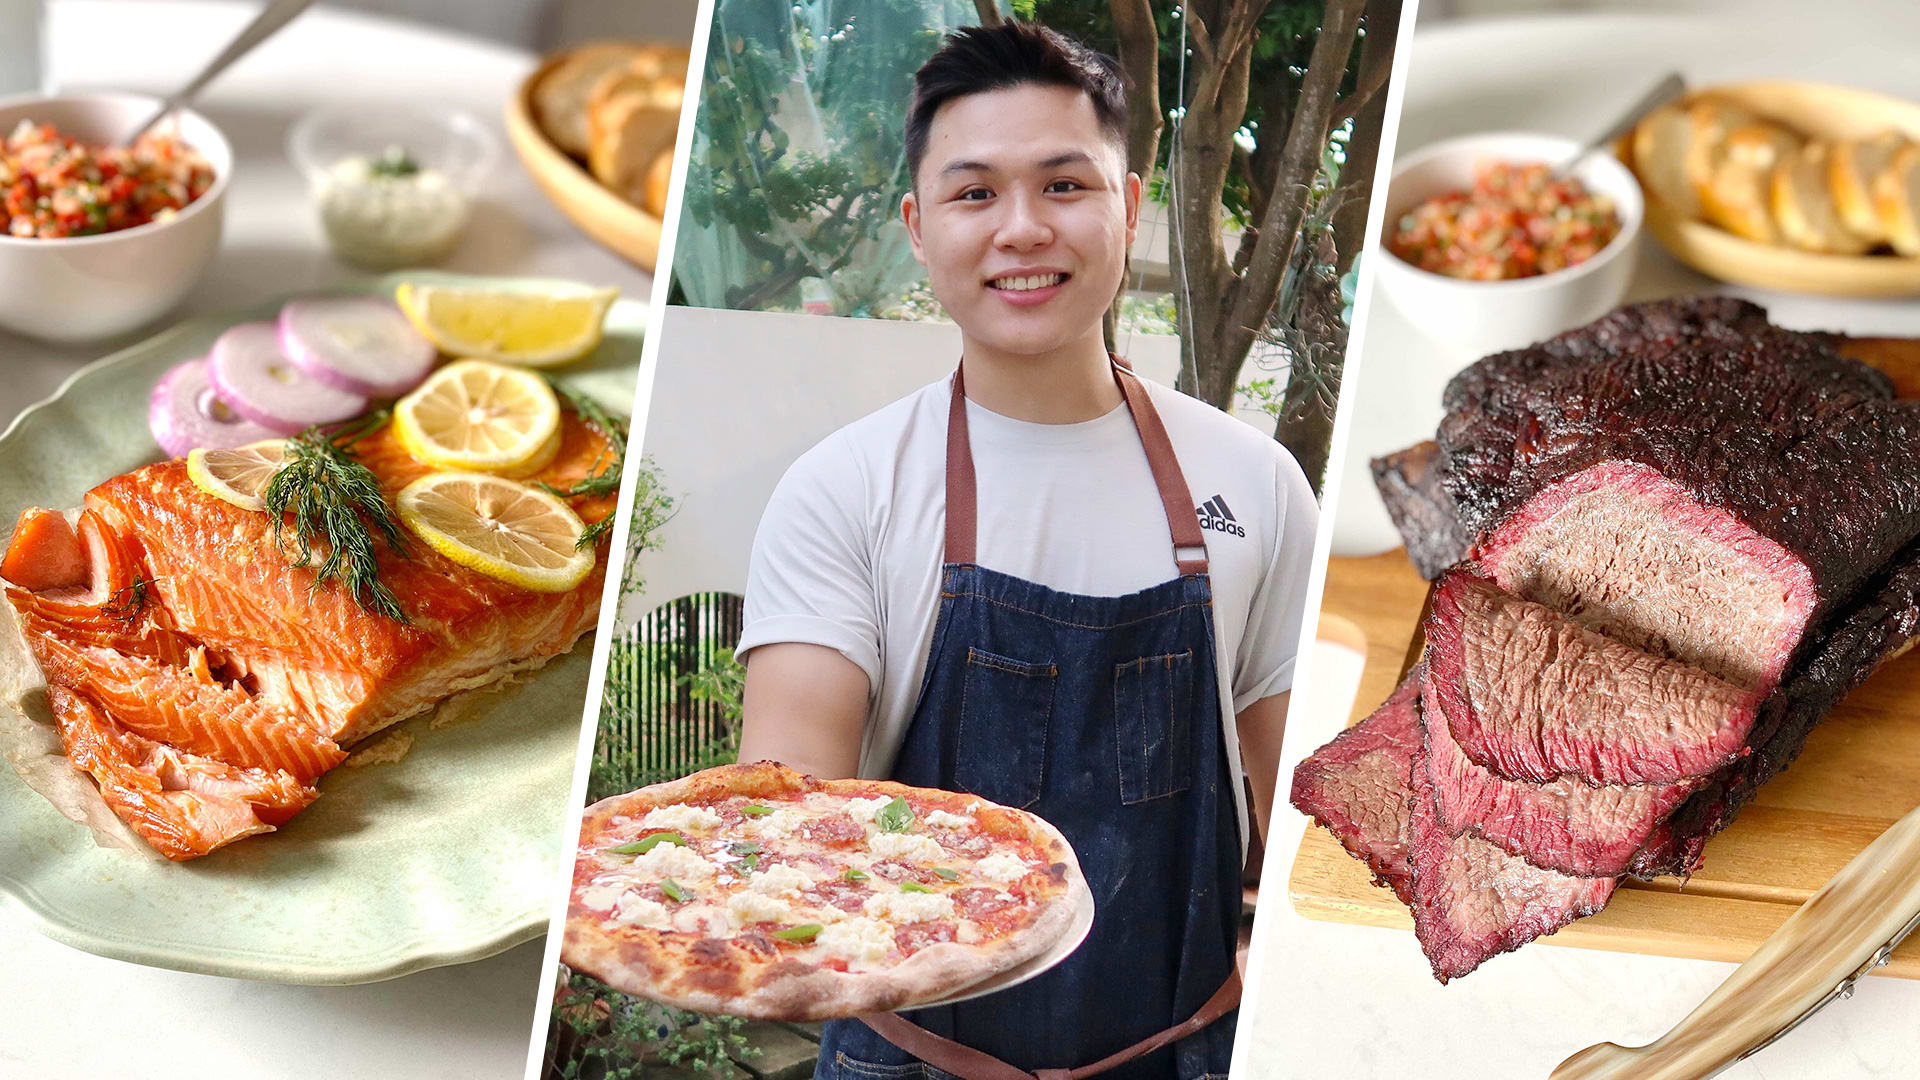 21-Year-Old NSman Sells Restaurant-Quality Pizza & American Barbecue From Home